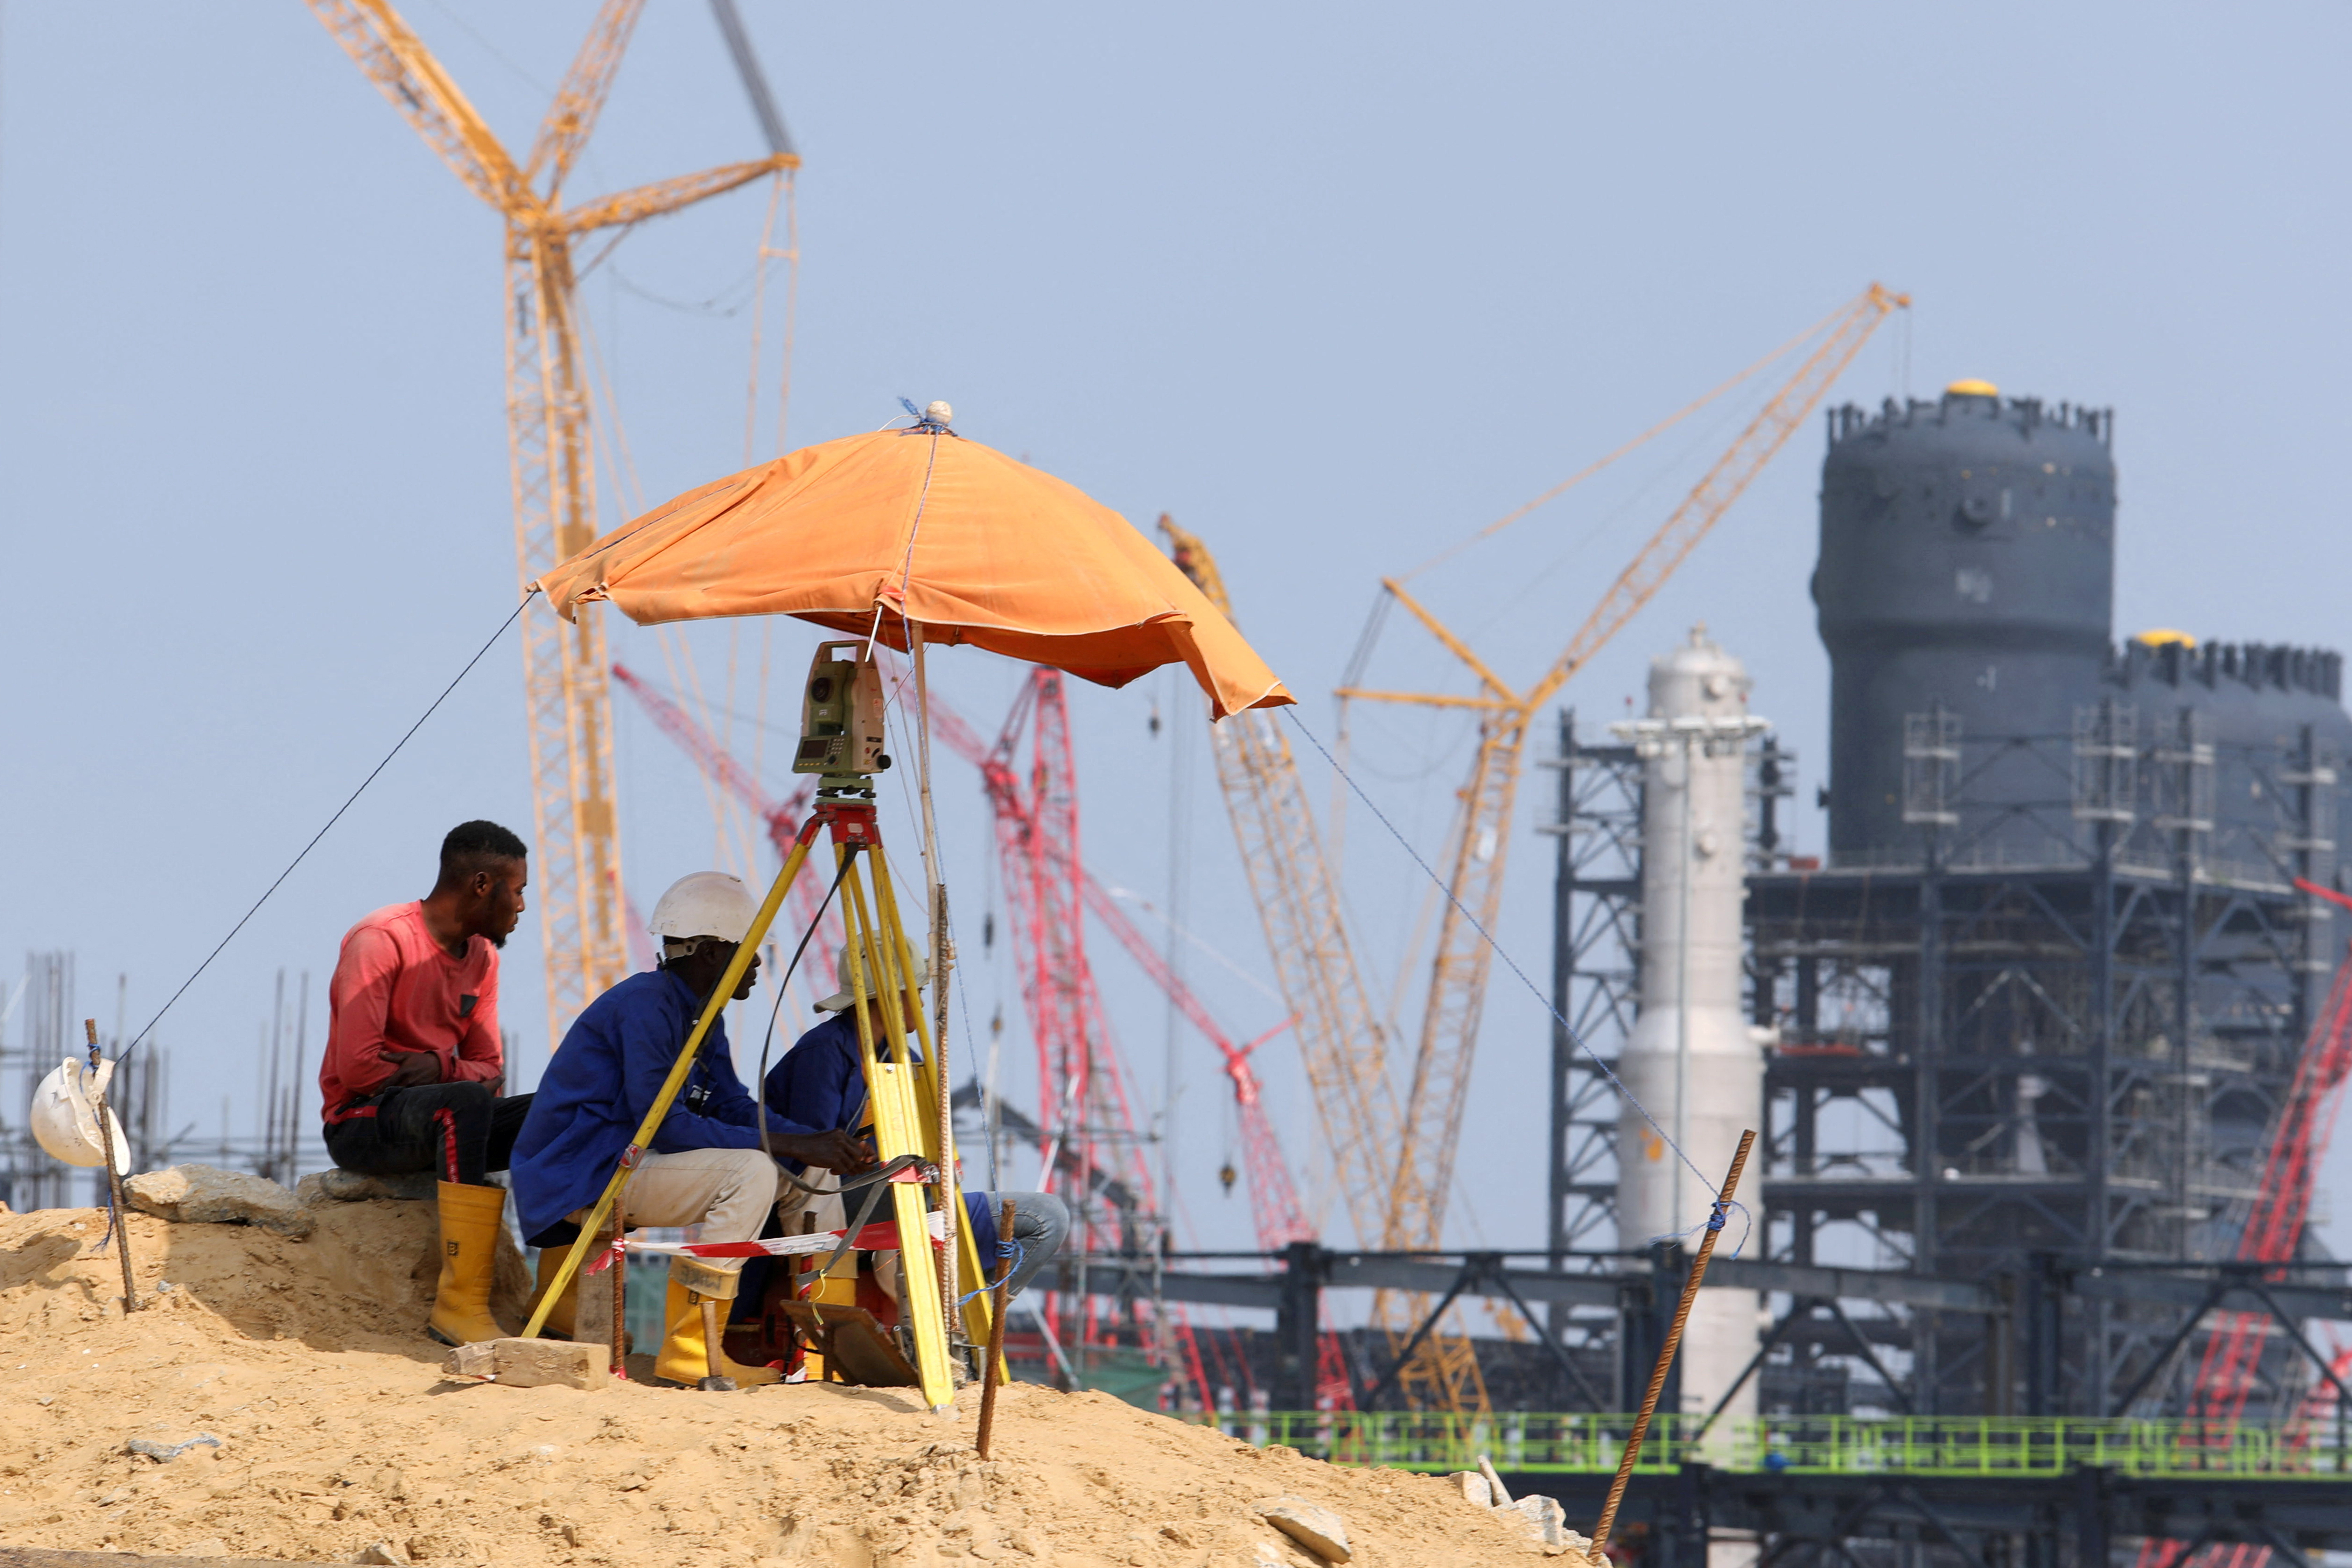 Workers sit at the construction site of the Dangote Refinery on the outskirts of Lagos, Nigeria